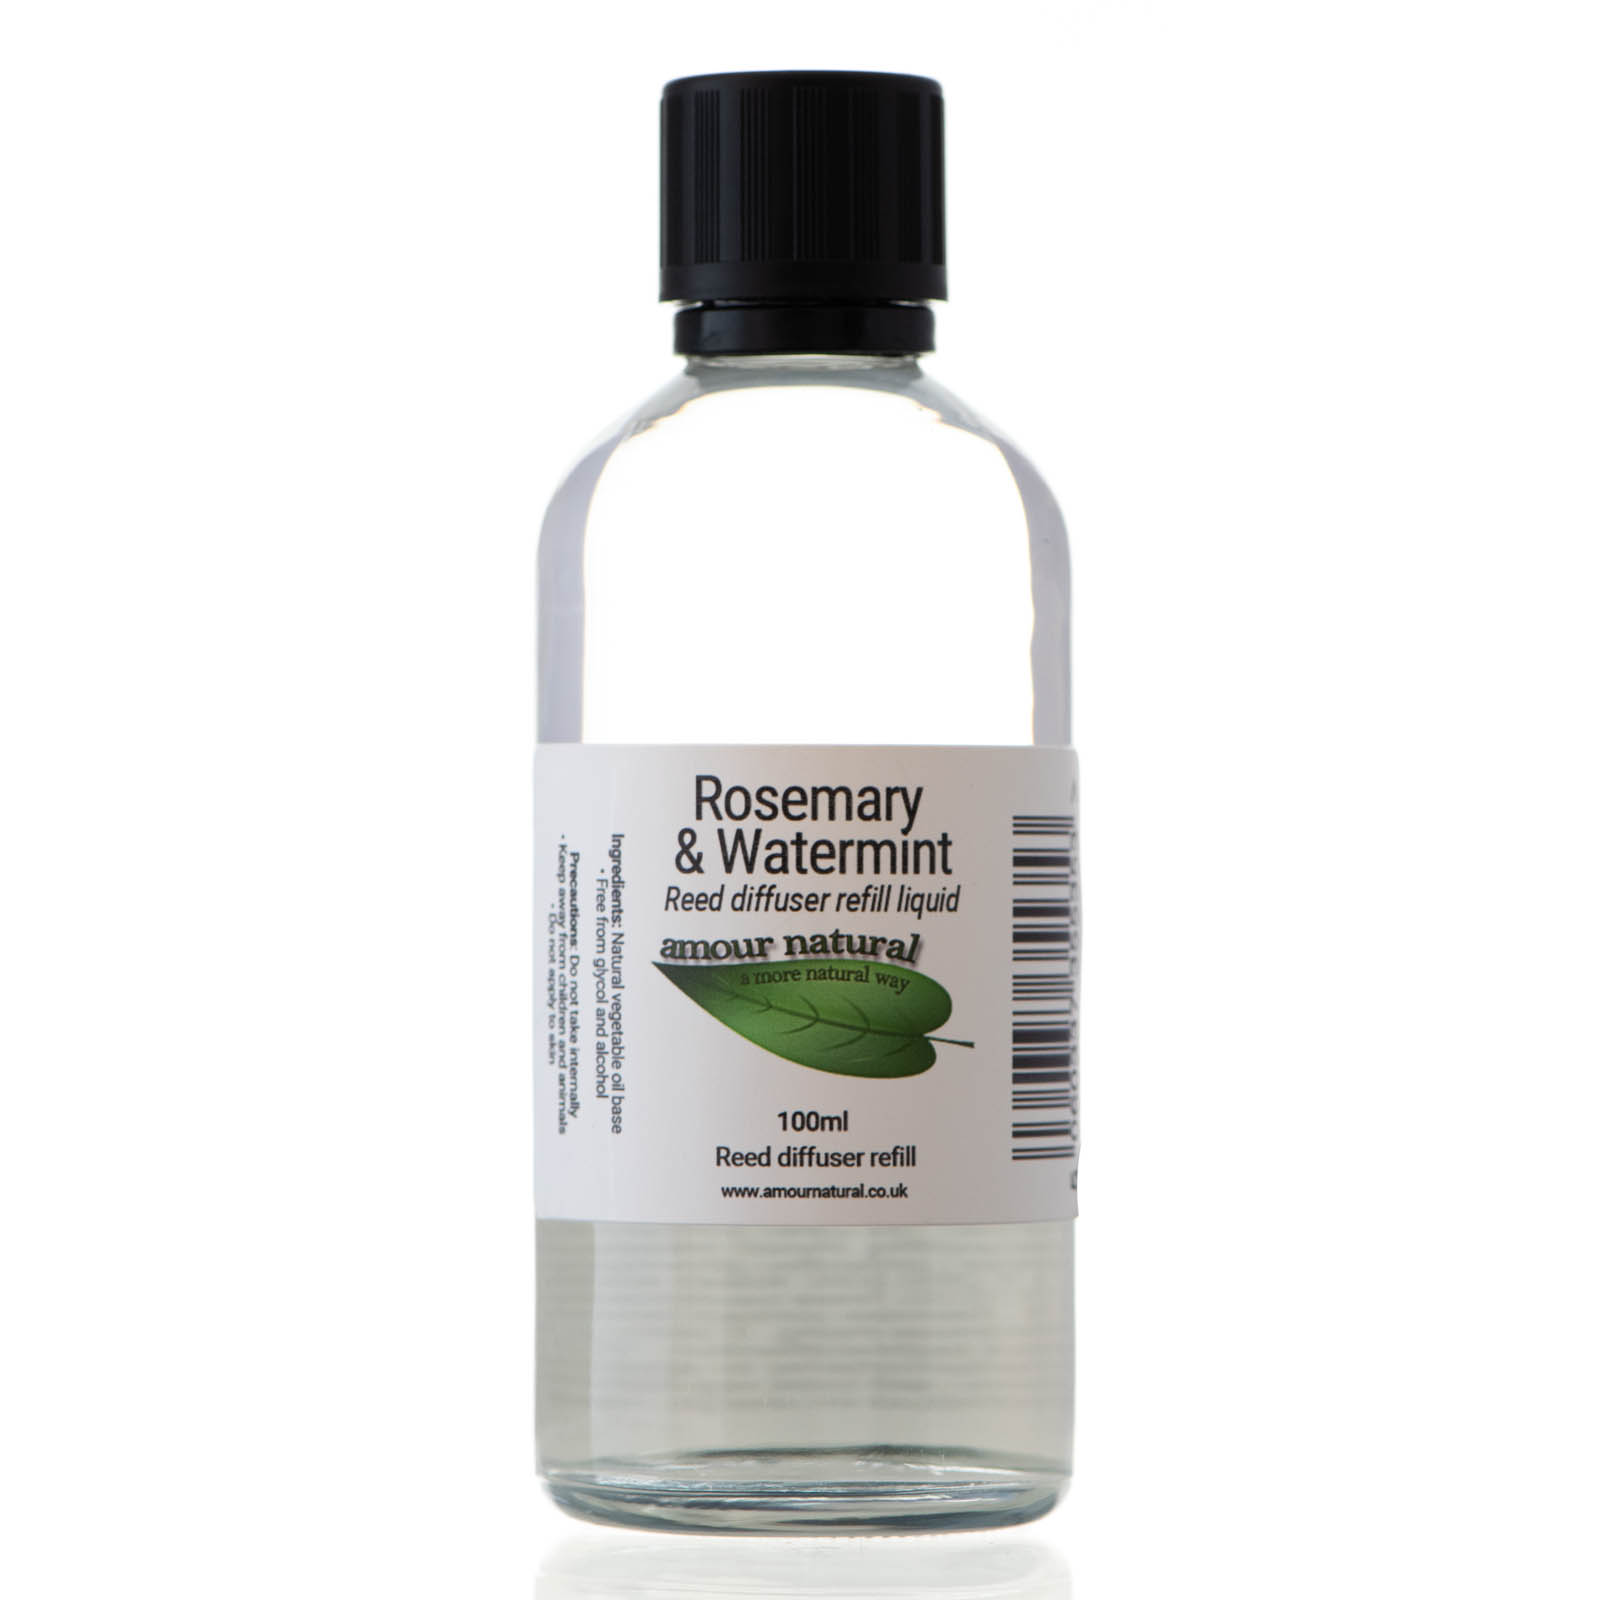 Rosemary and Watermint reed diffuser refill (bottle only)